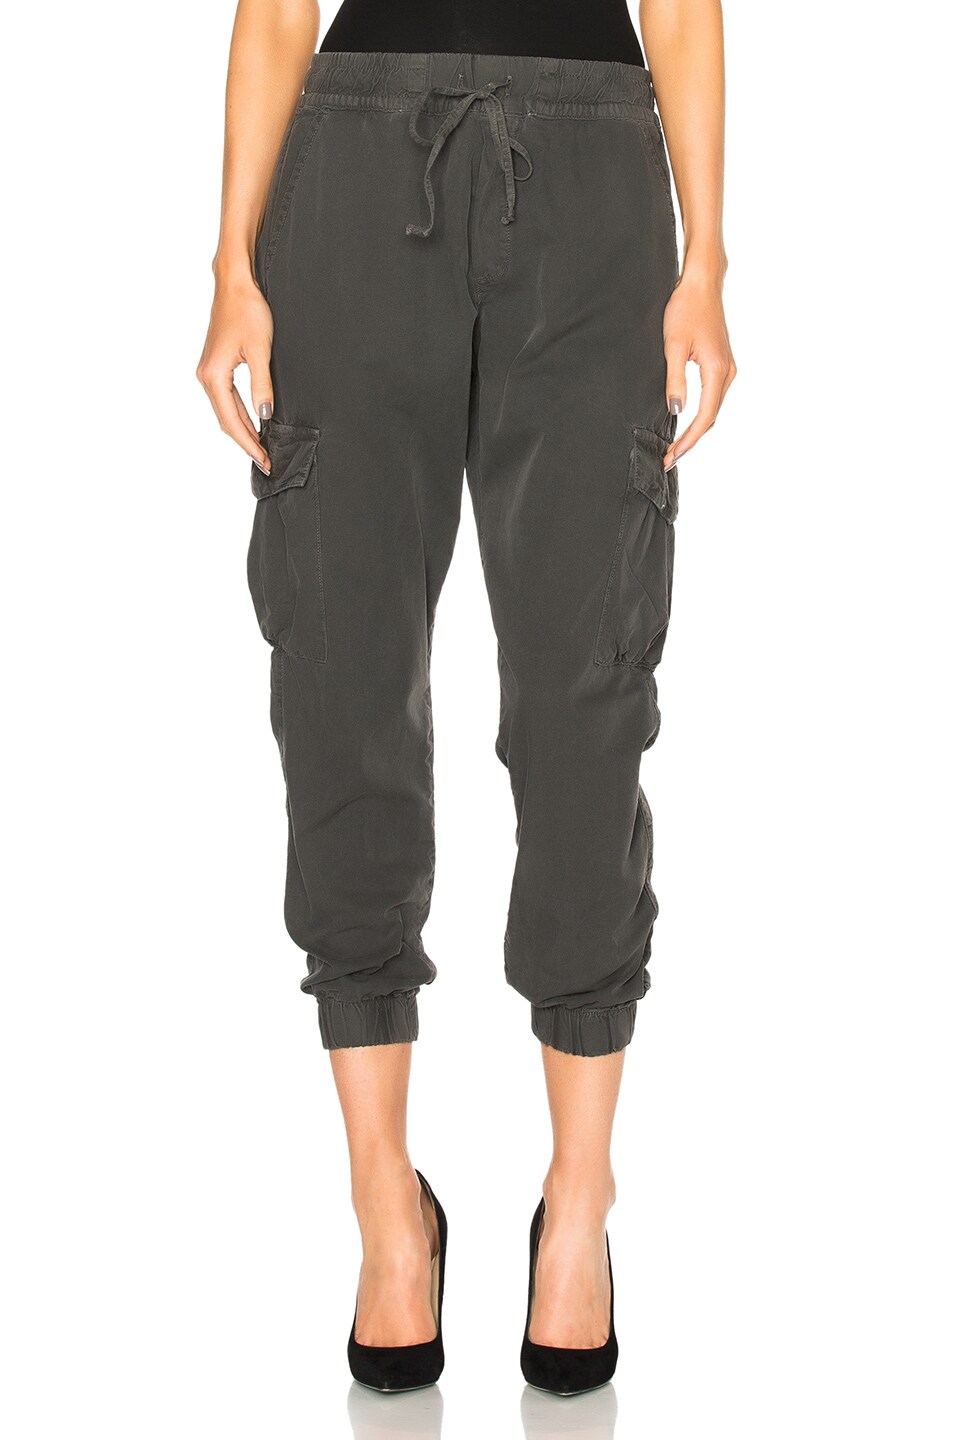 Image 1 of NSF All Day NSF Johnny Pants in Pigment Black